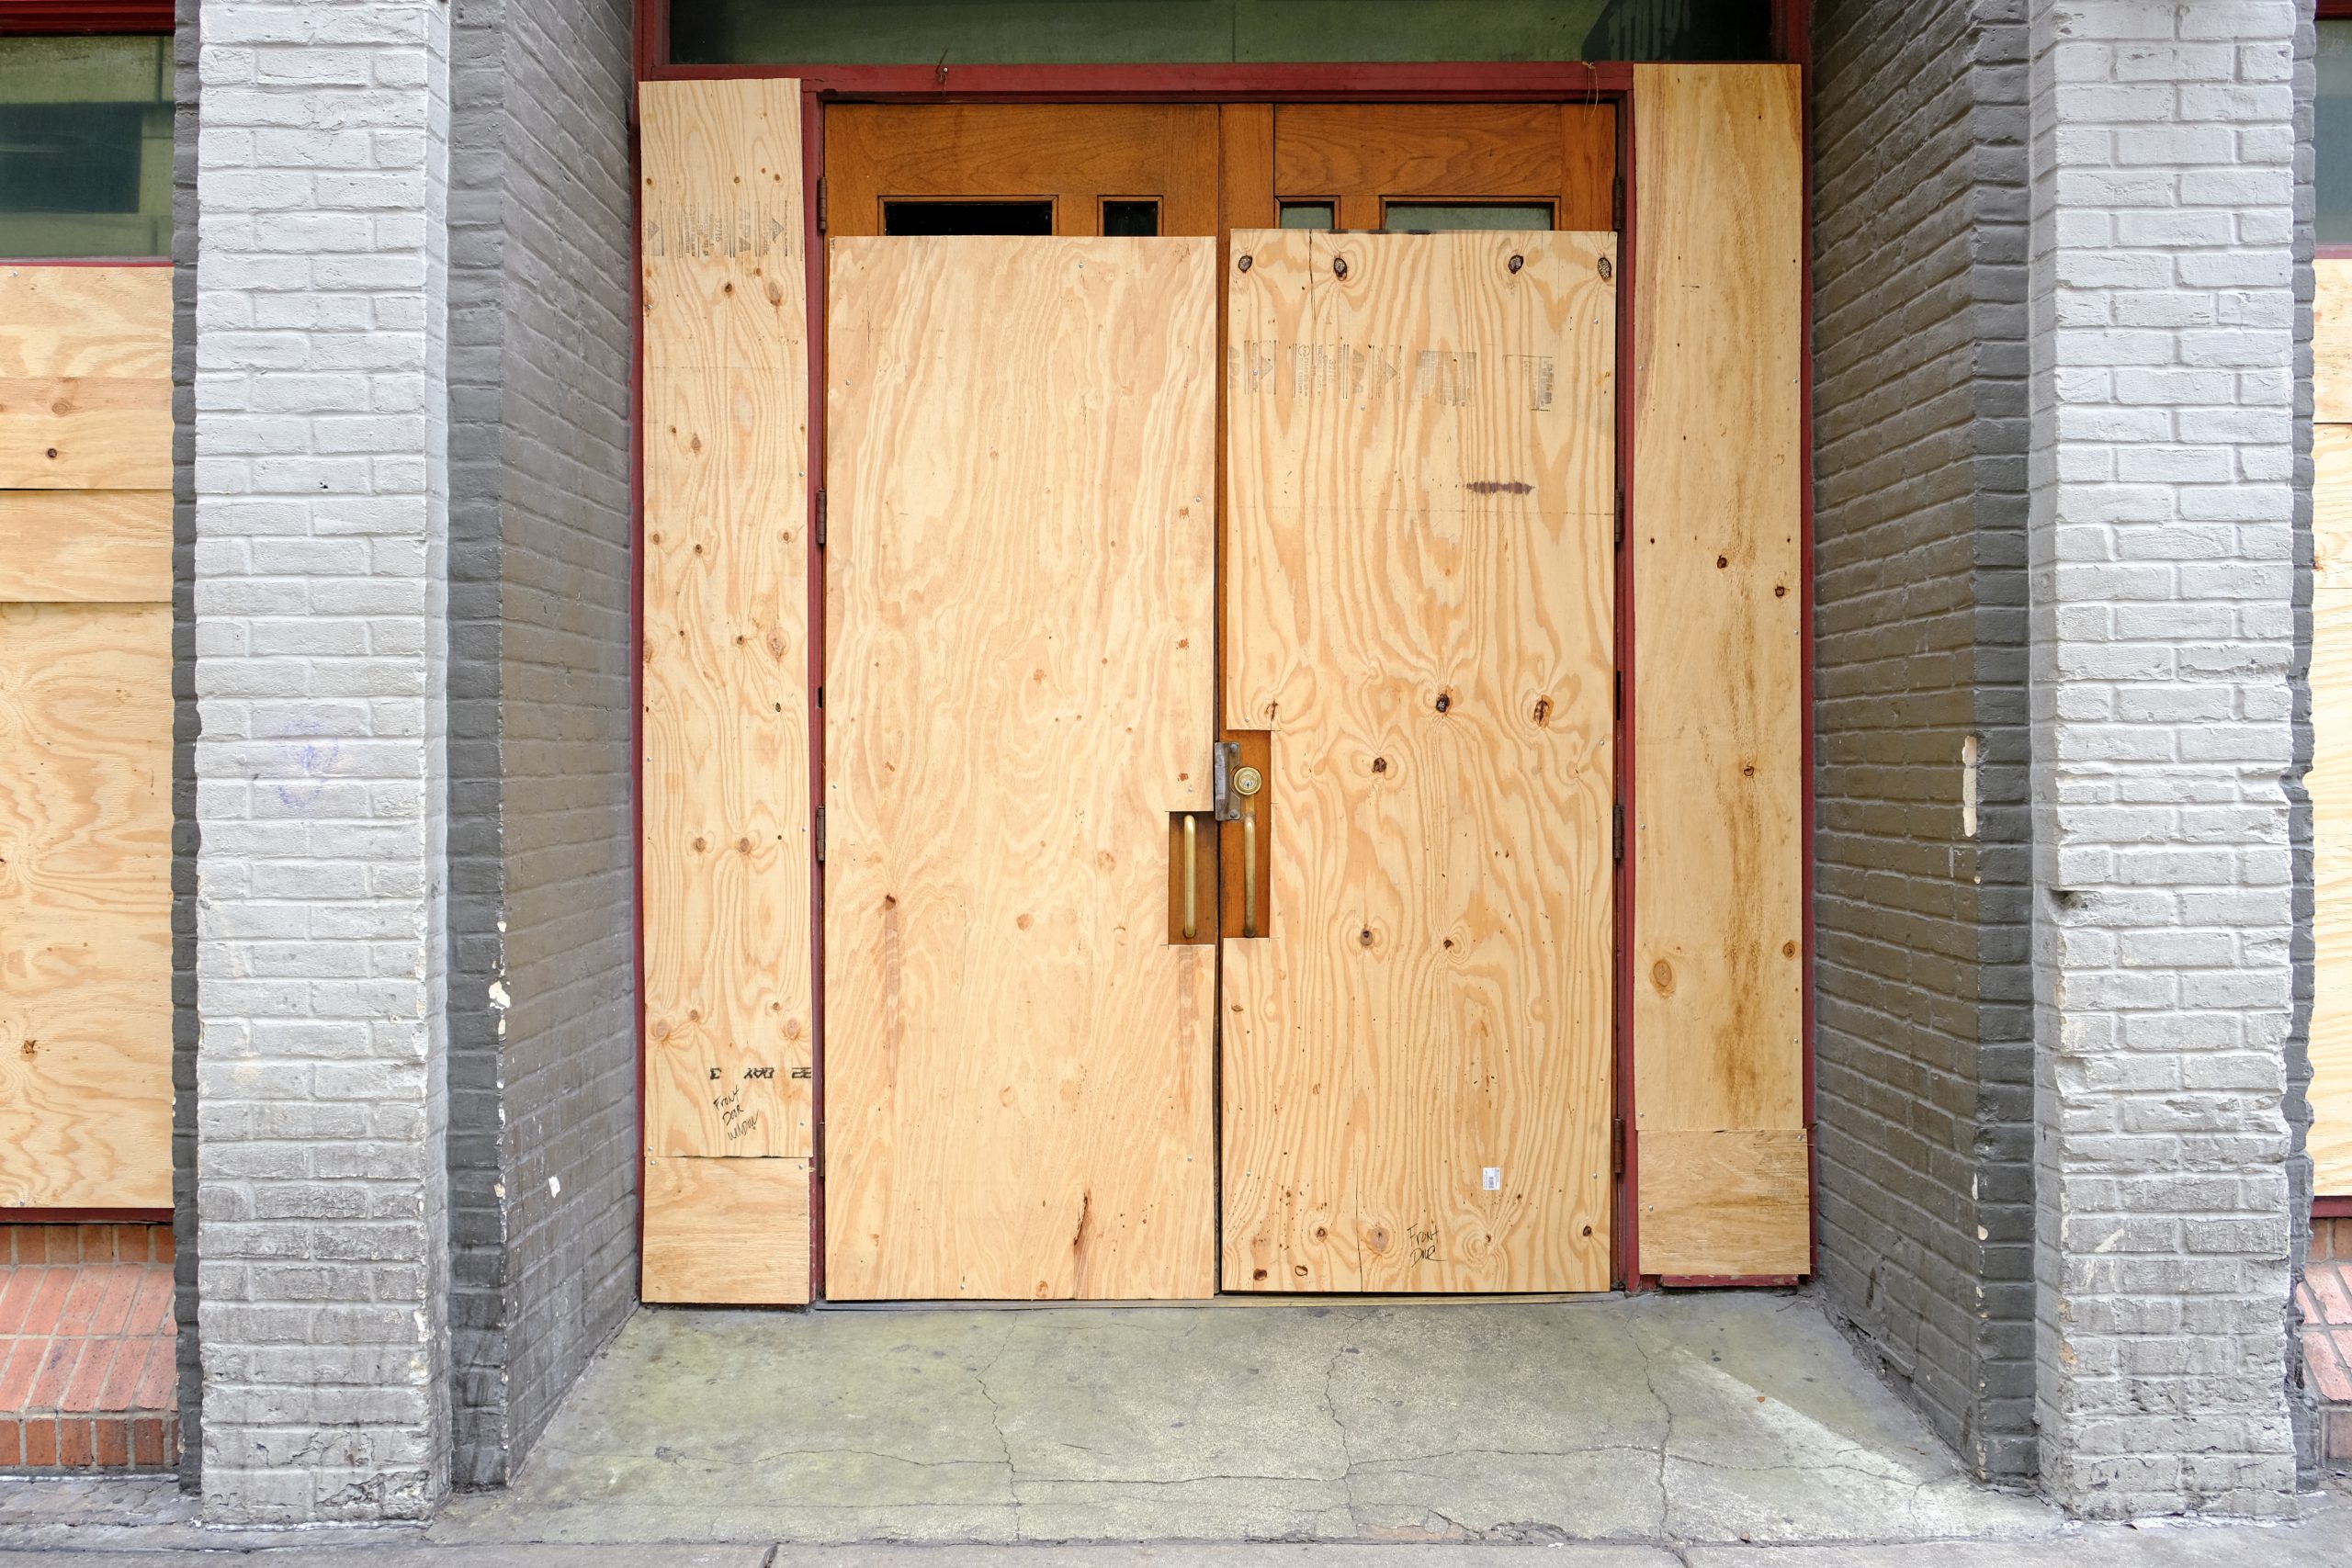 Boarded up doors ready for notting hill carnival 2022 